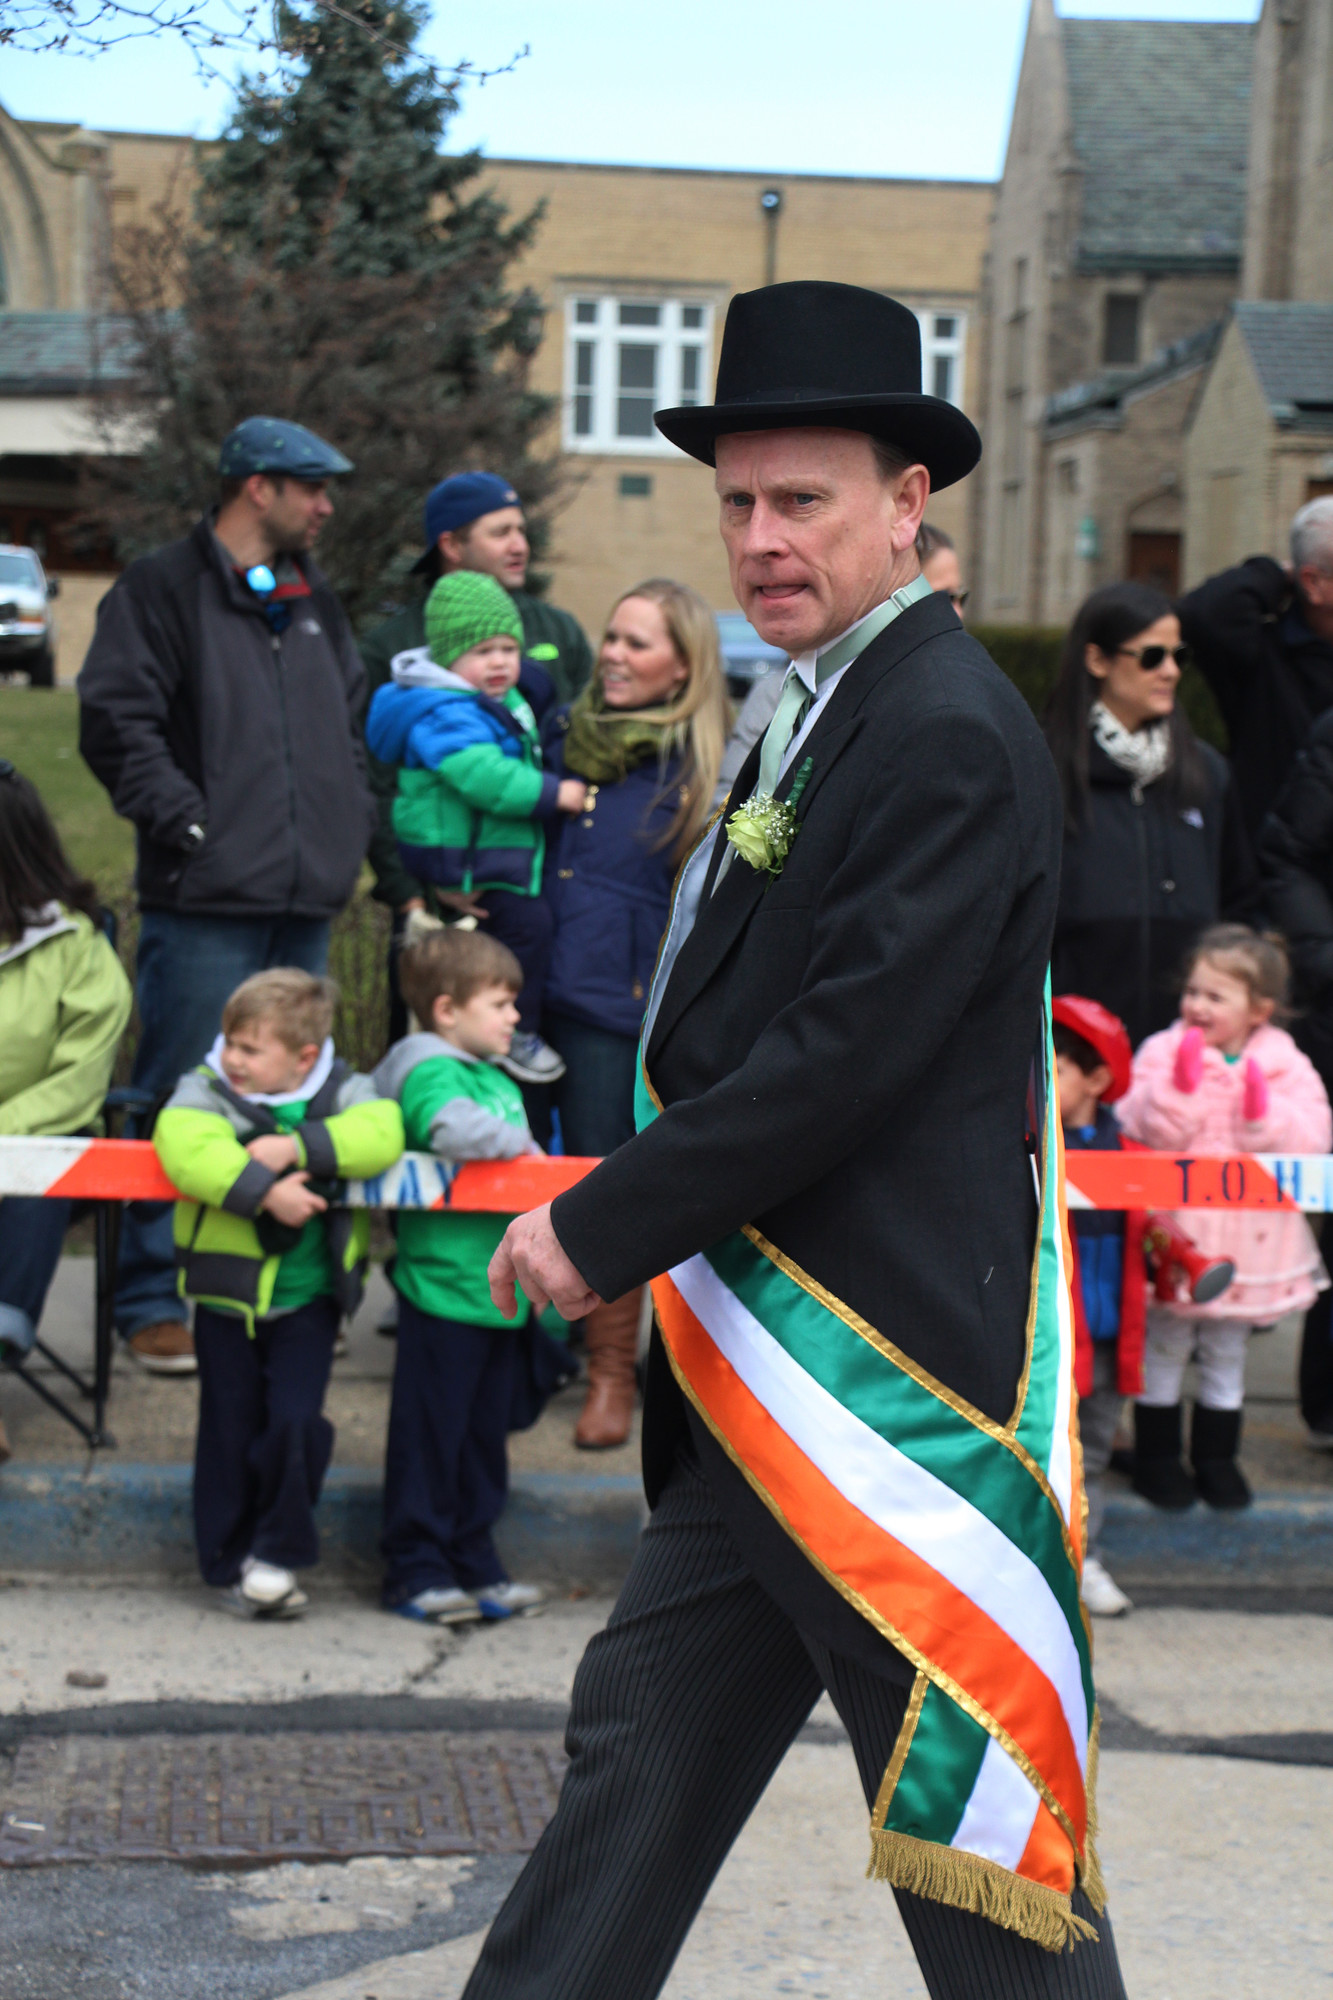 Grand Marshal Michael O’Reilly led the parade through the village.